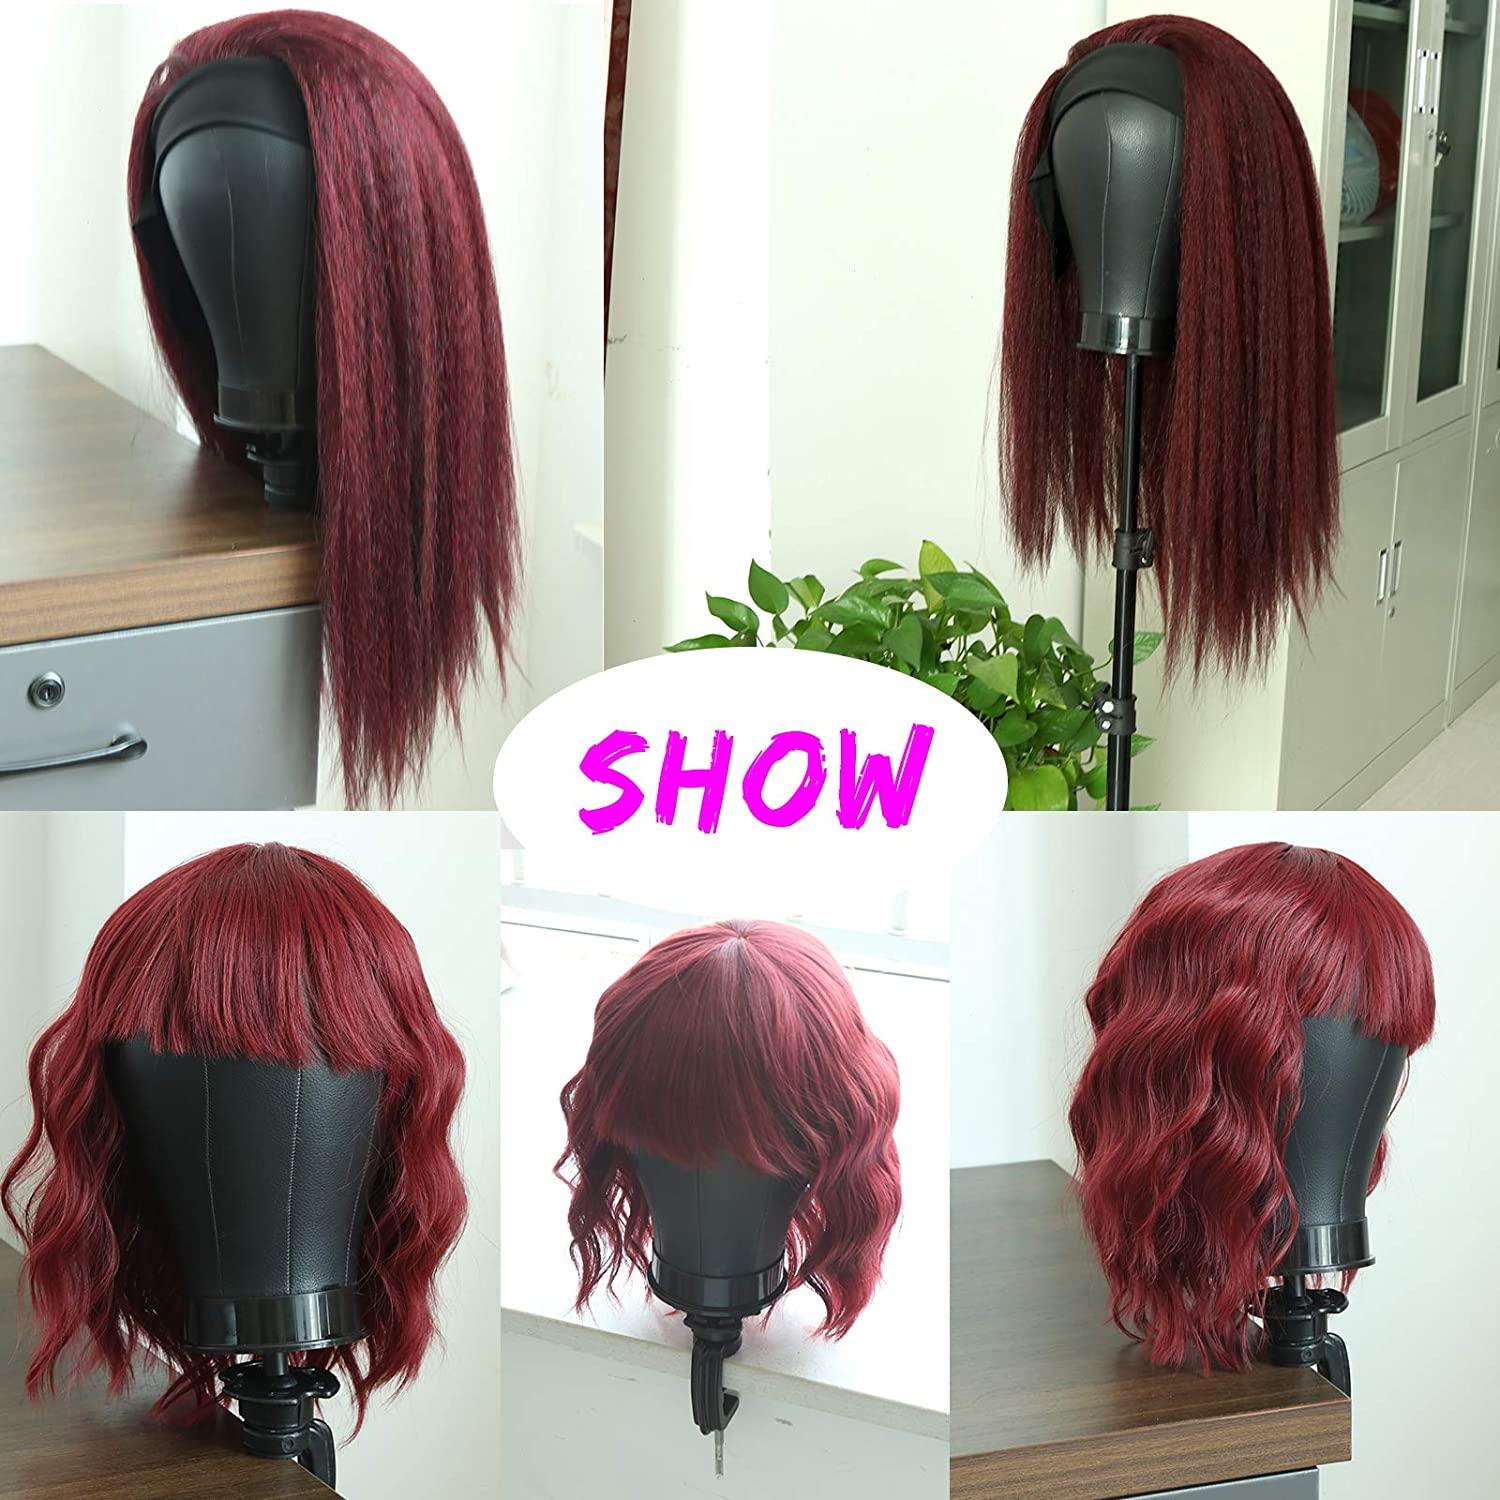 Leeven 21-24 Wig Head With Stand for Making Wigs Canvas Block